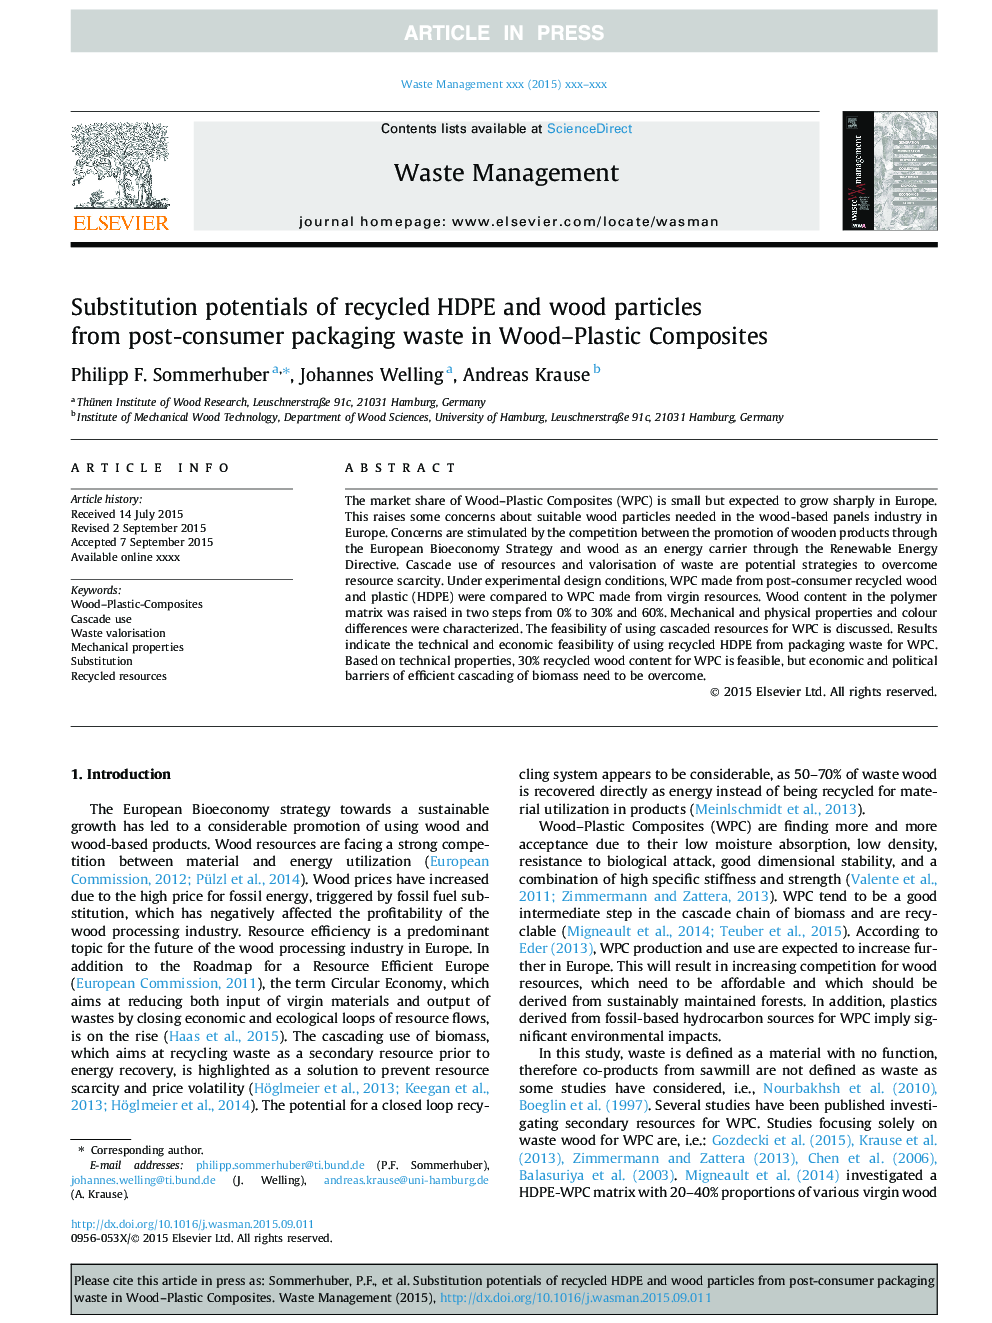 Substitution potentials of recycled HDPE and wood particles from post-consumer packaging waste in Wood-Plastic Composites